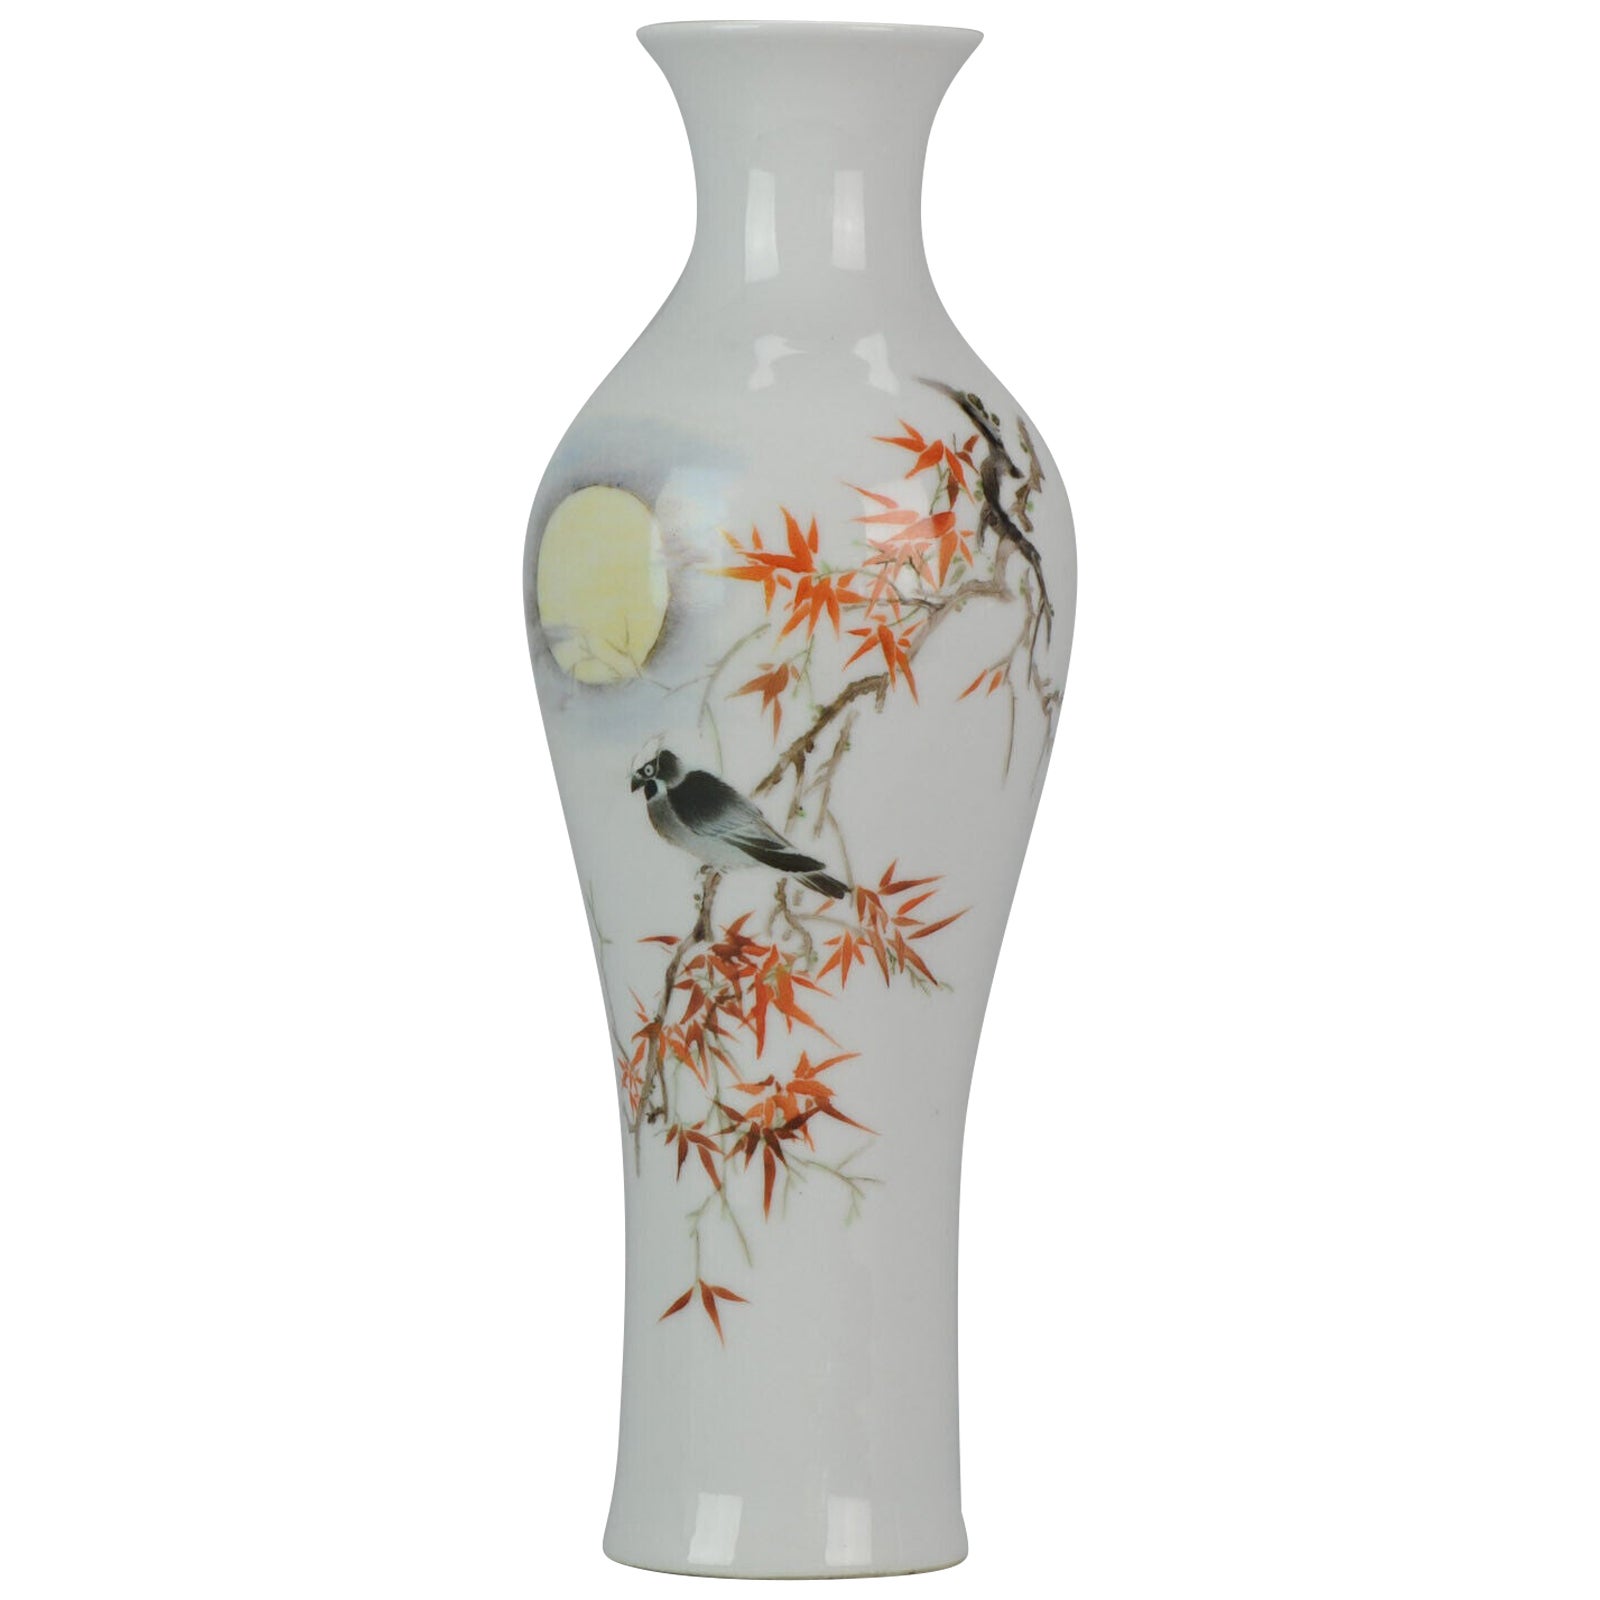 PROC Chinese Porcelain Vase with Flowers High Quality, Late 20th Century